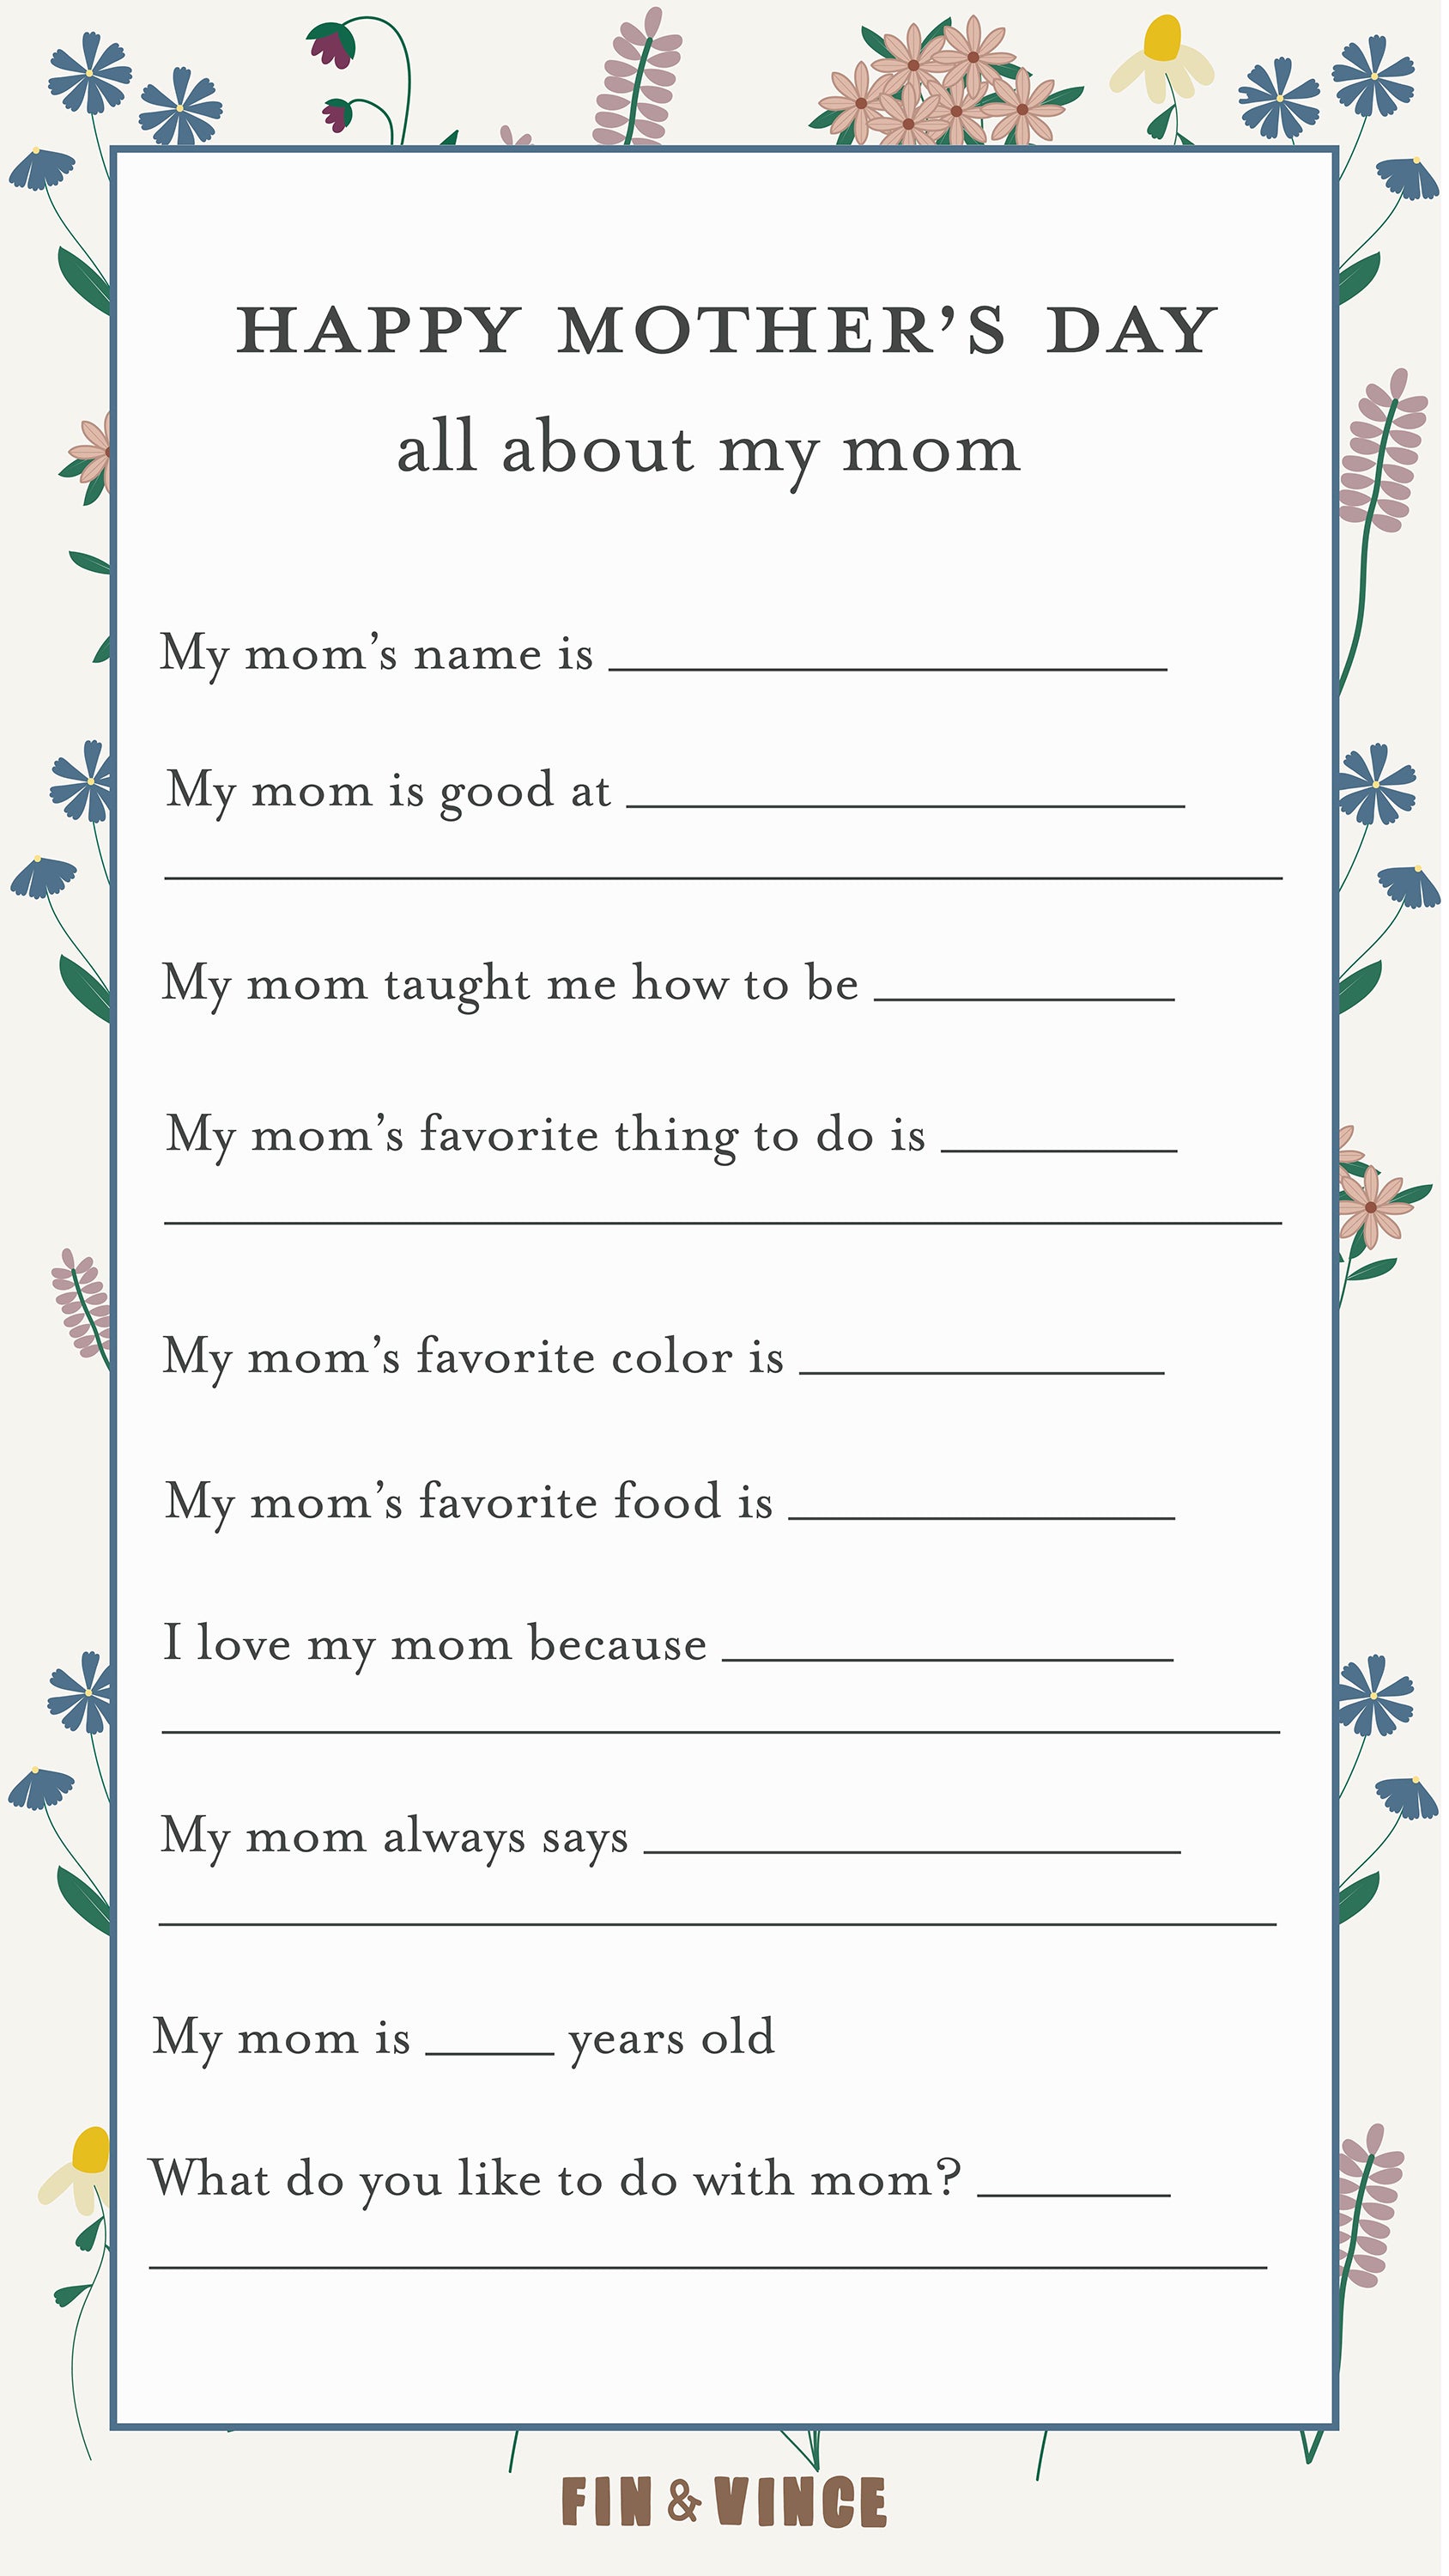 mother-s-day-questionnaire-free-printable-fin-vince